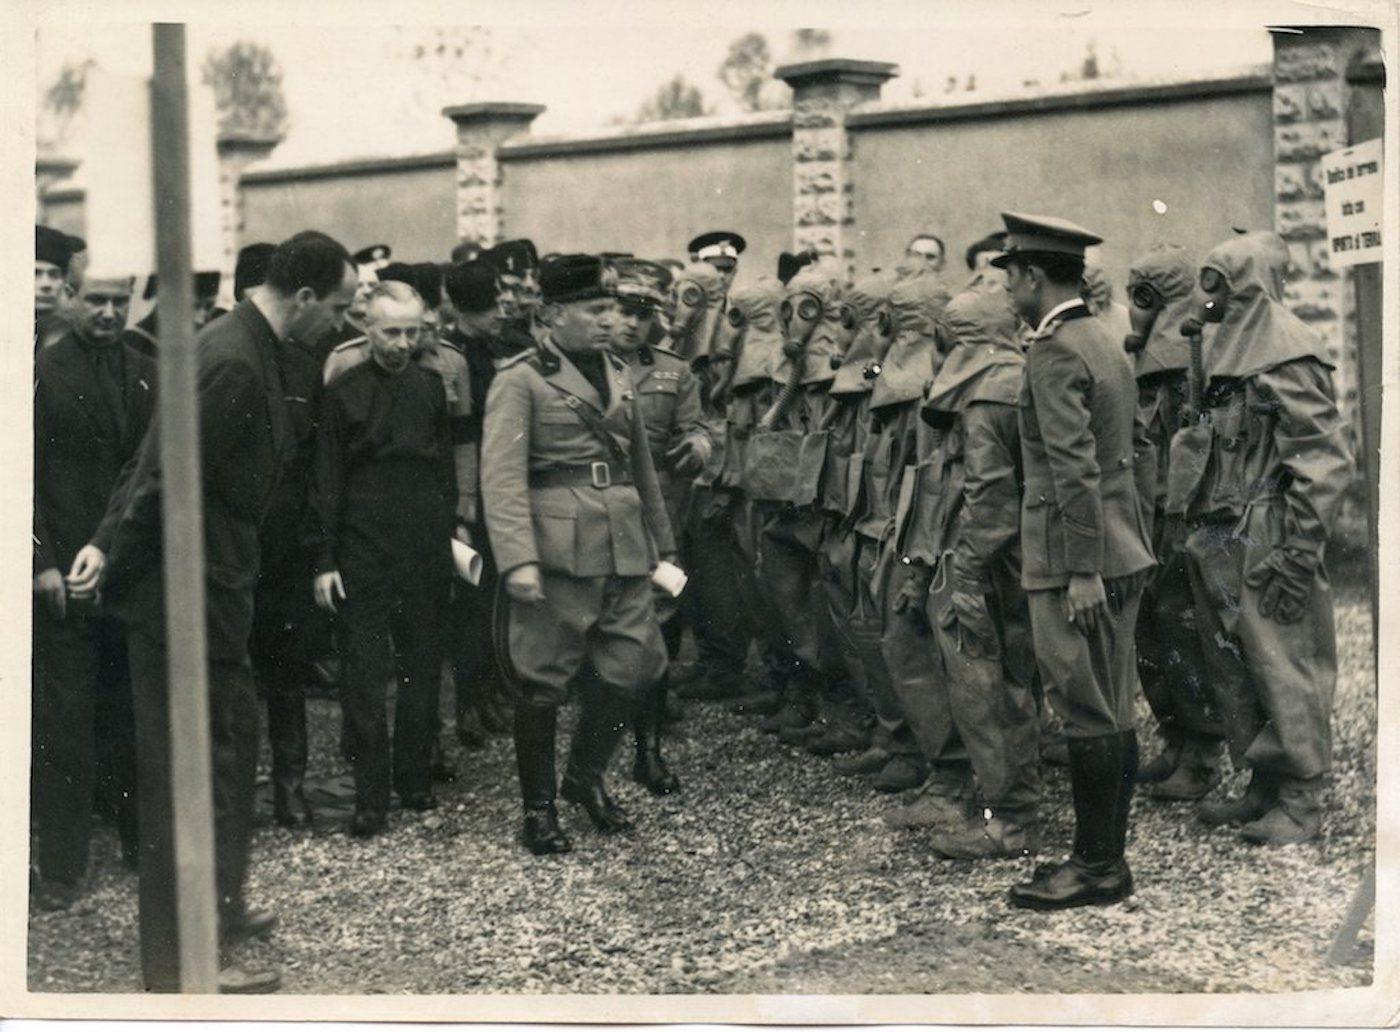 Unknown Black and White Photograph - Mussolini Visits A Chemical Industry in Melegnano - Vintage Photo 1935